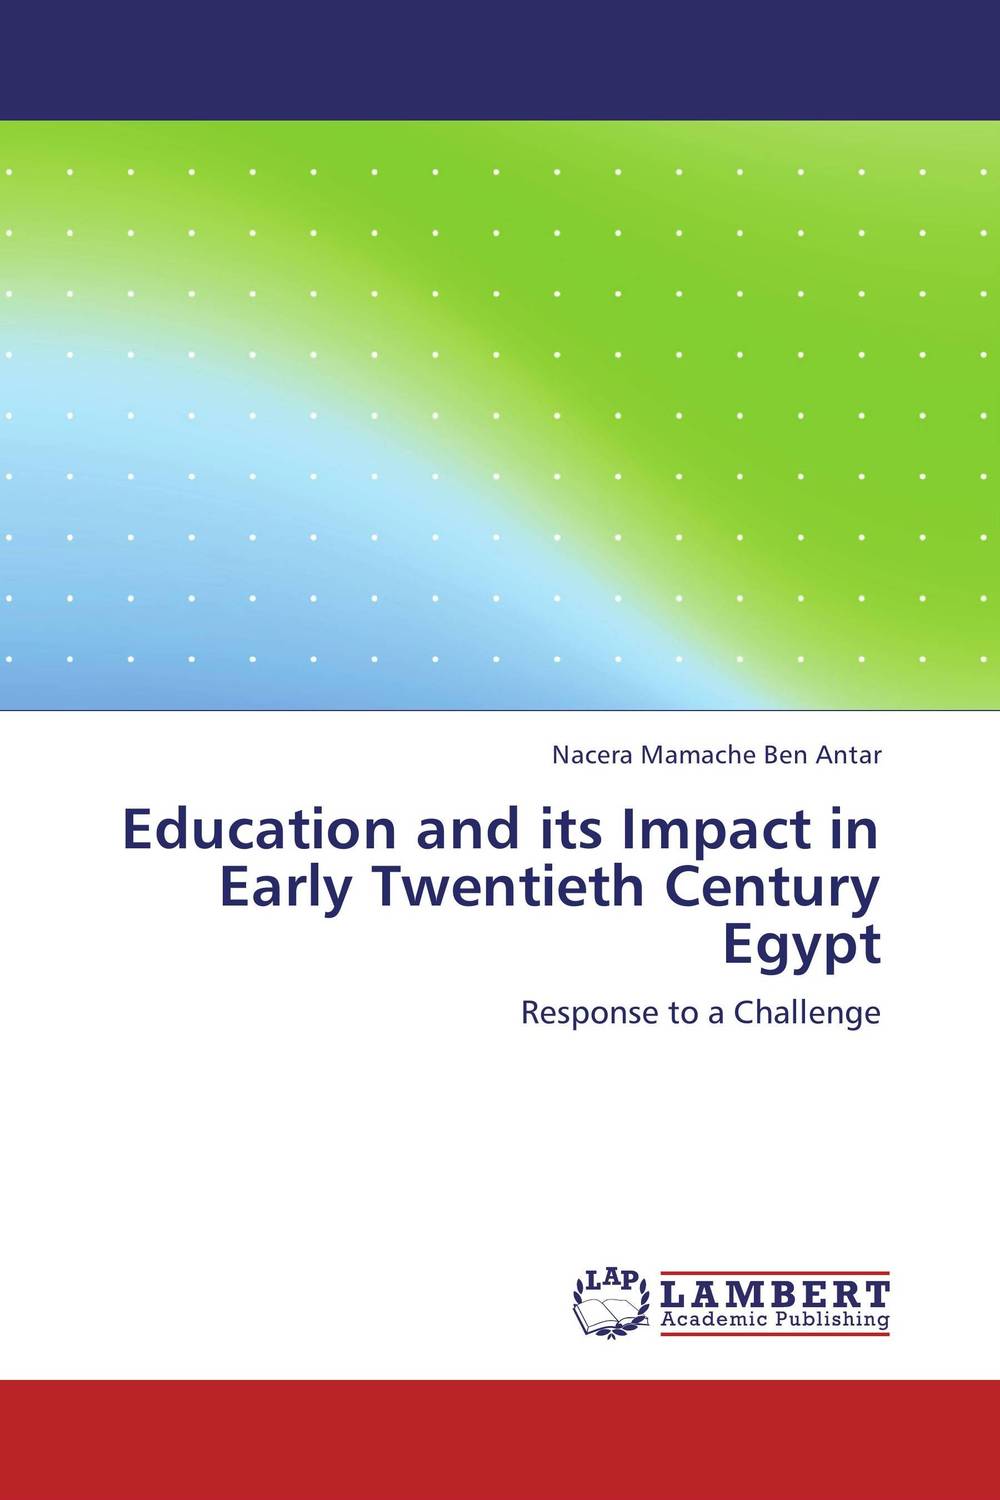 Education and its Impact in Early Twentieth Century Egypt